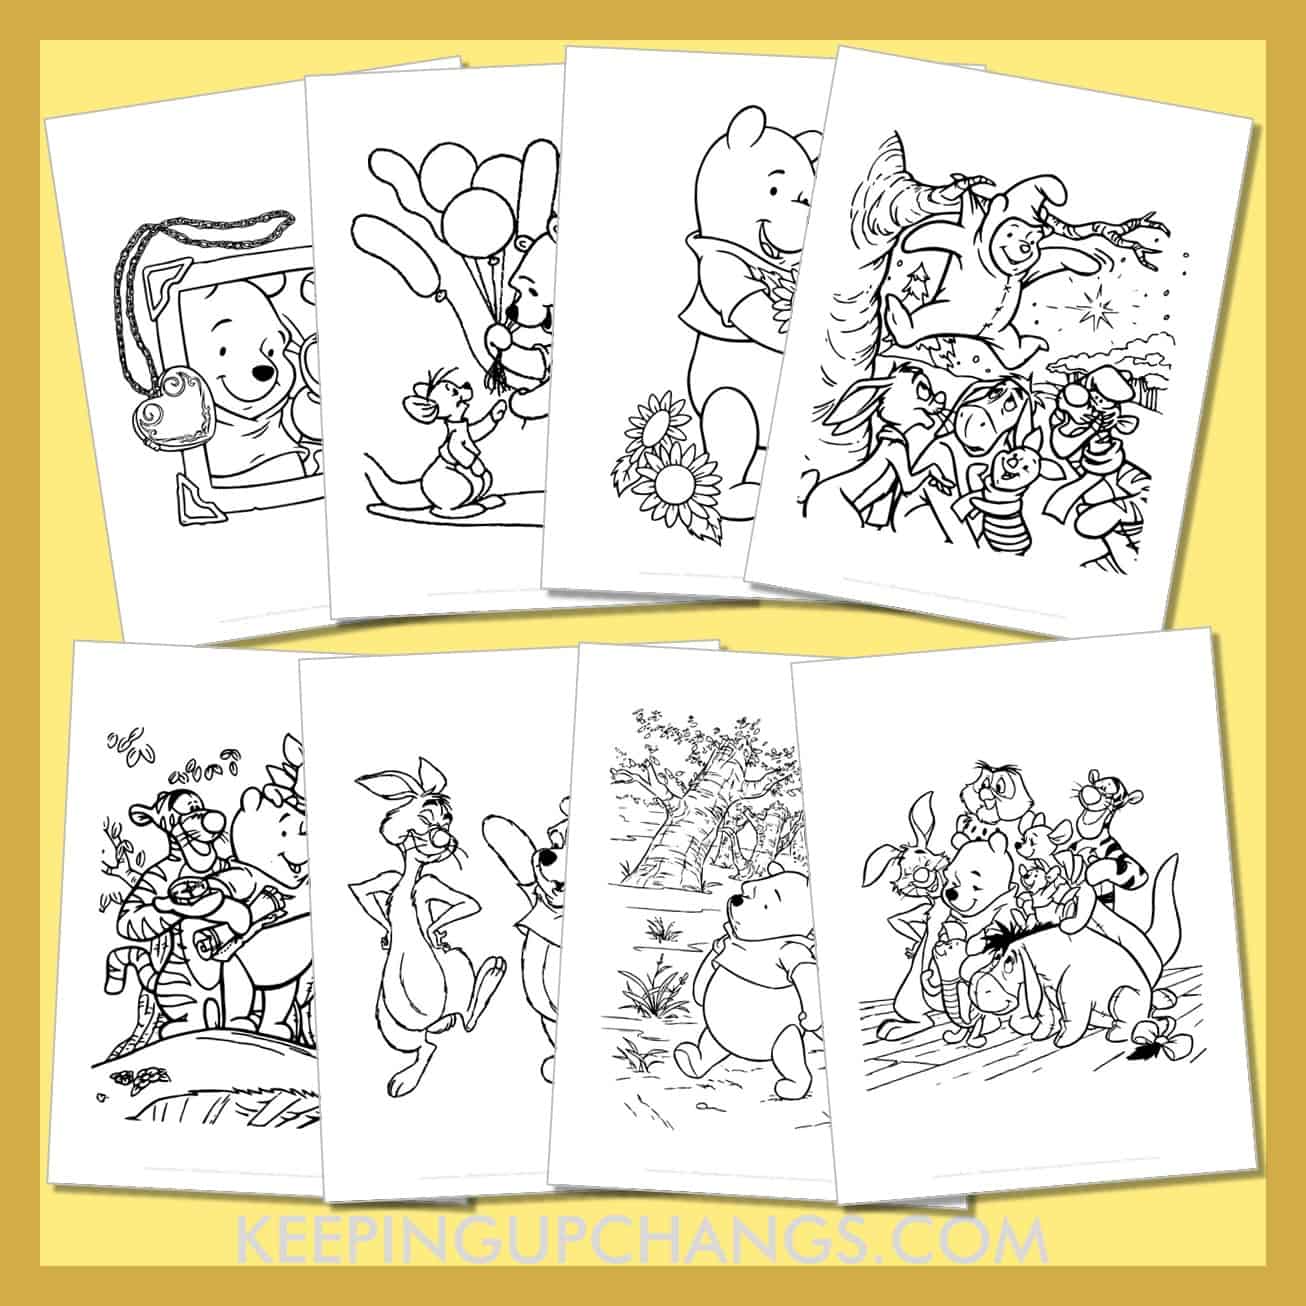 free winnie the pooh pictures to color for toddlers, kids, adults.